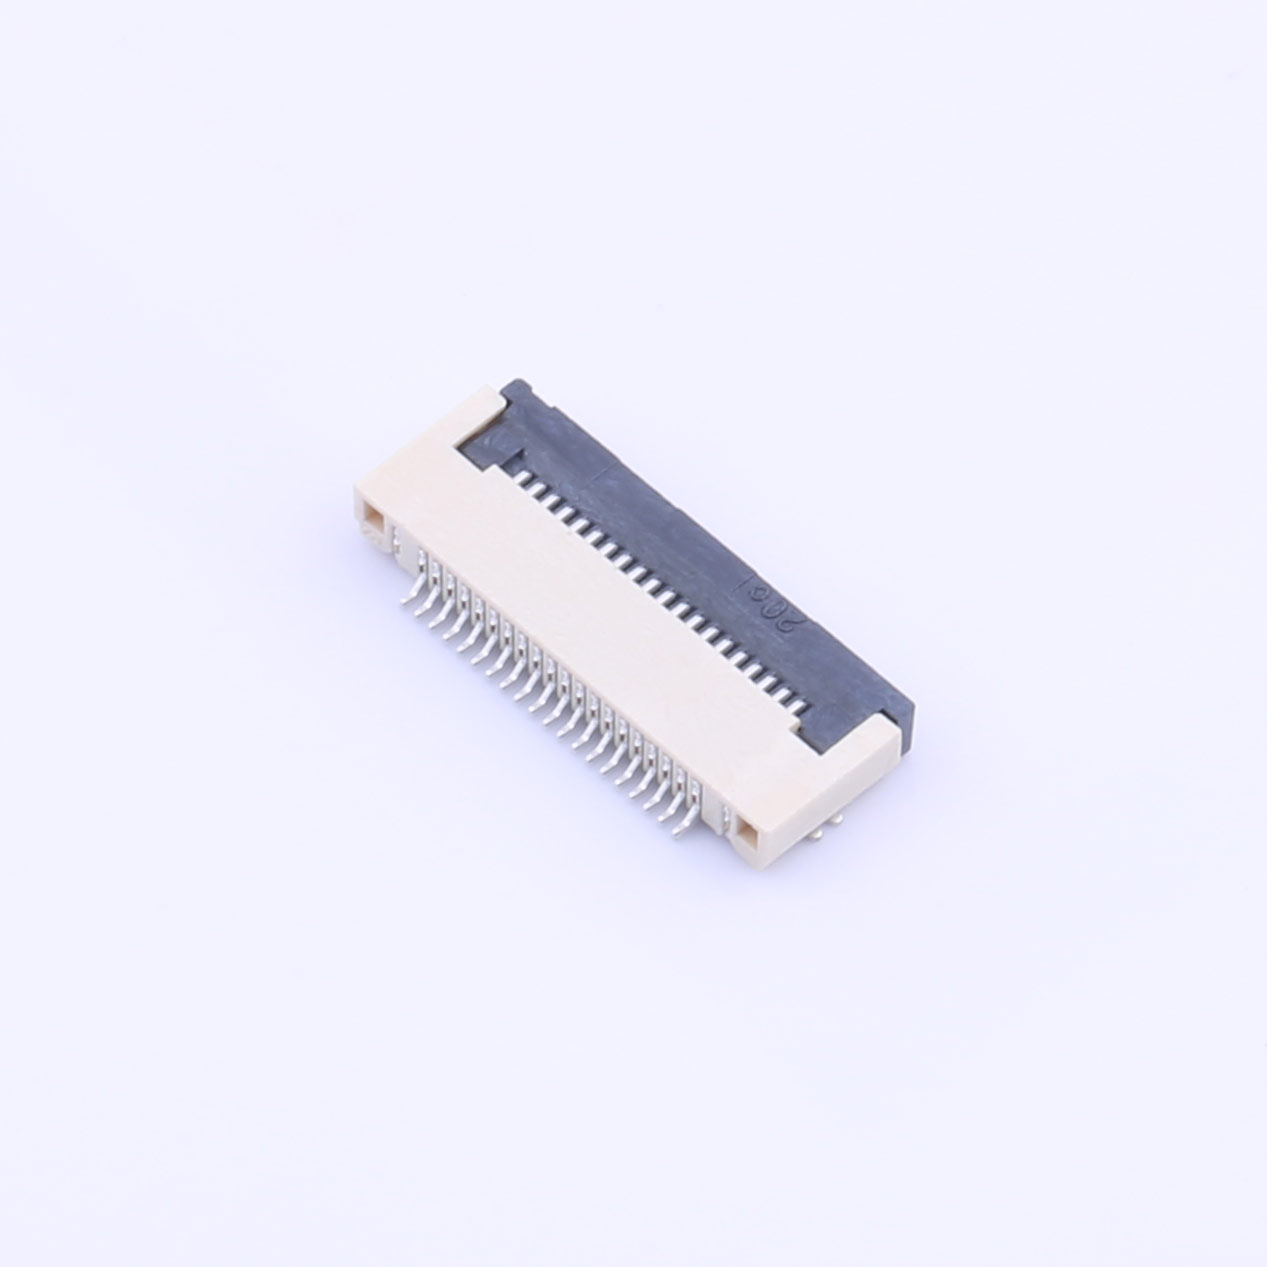 Kinghelm 0.5mm Pitch FPC FFC Connector 20P Height 2mm Front Flip Bottom Contact SMT FPC Connector